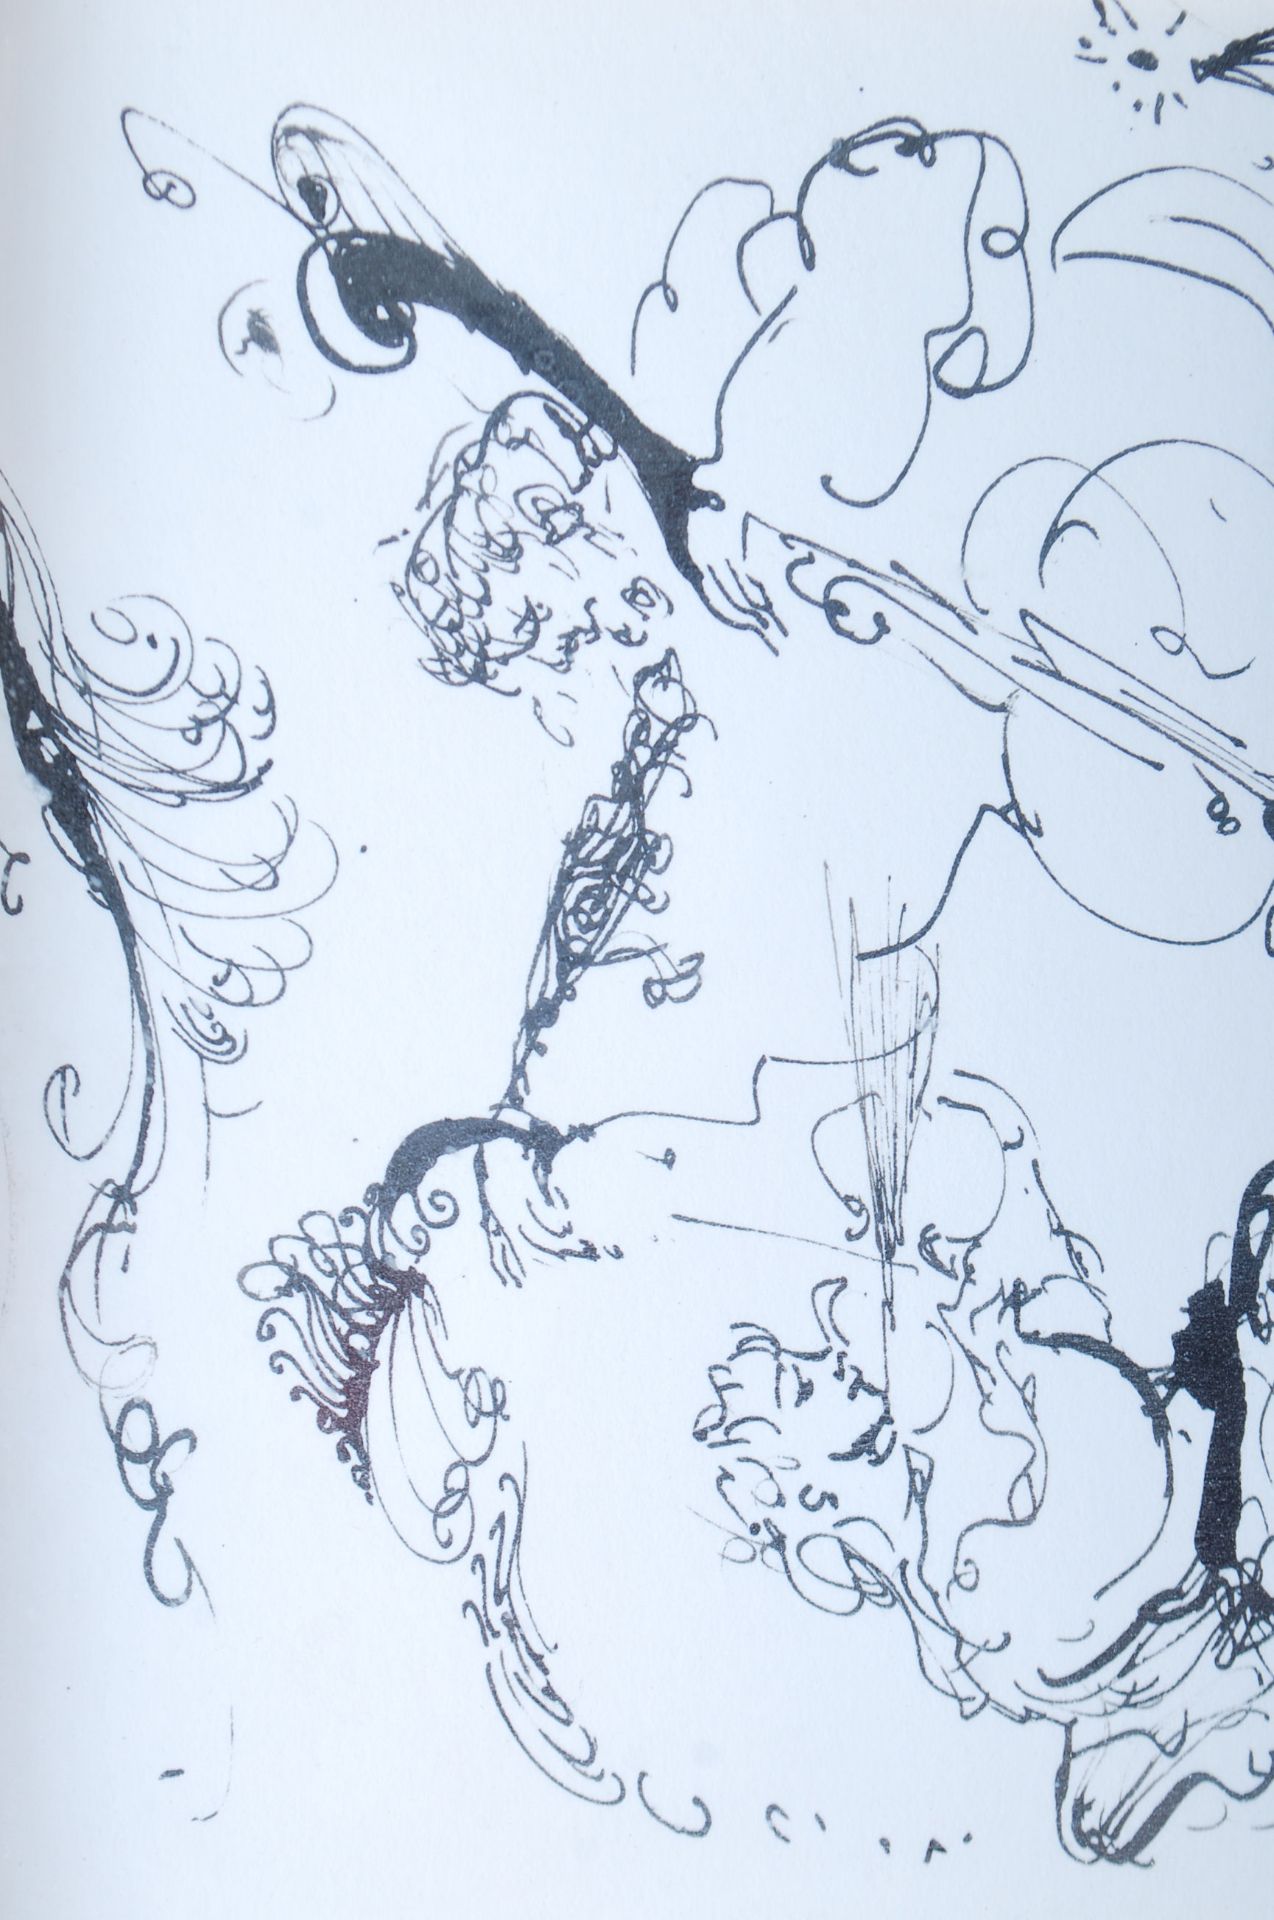 DEENAGH MILLER LOCAL INTEREST INK DRAWING OF MUSICIANS - Image 3 of 5